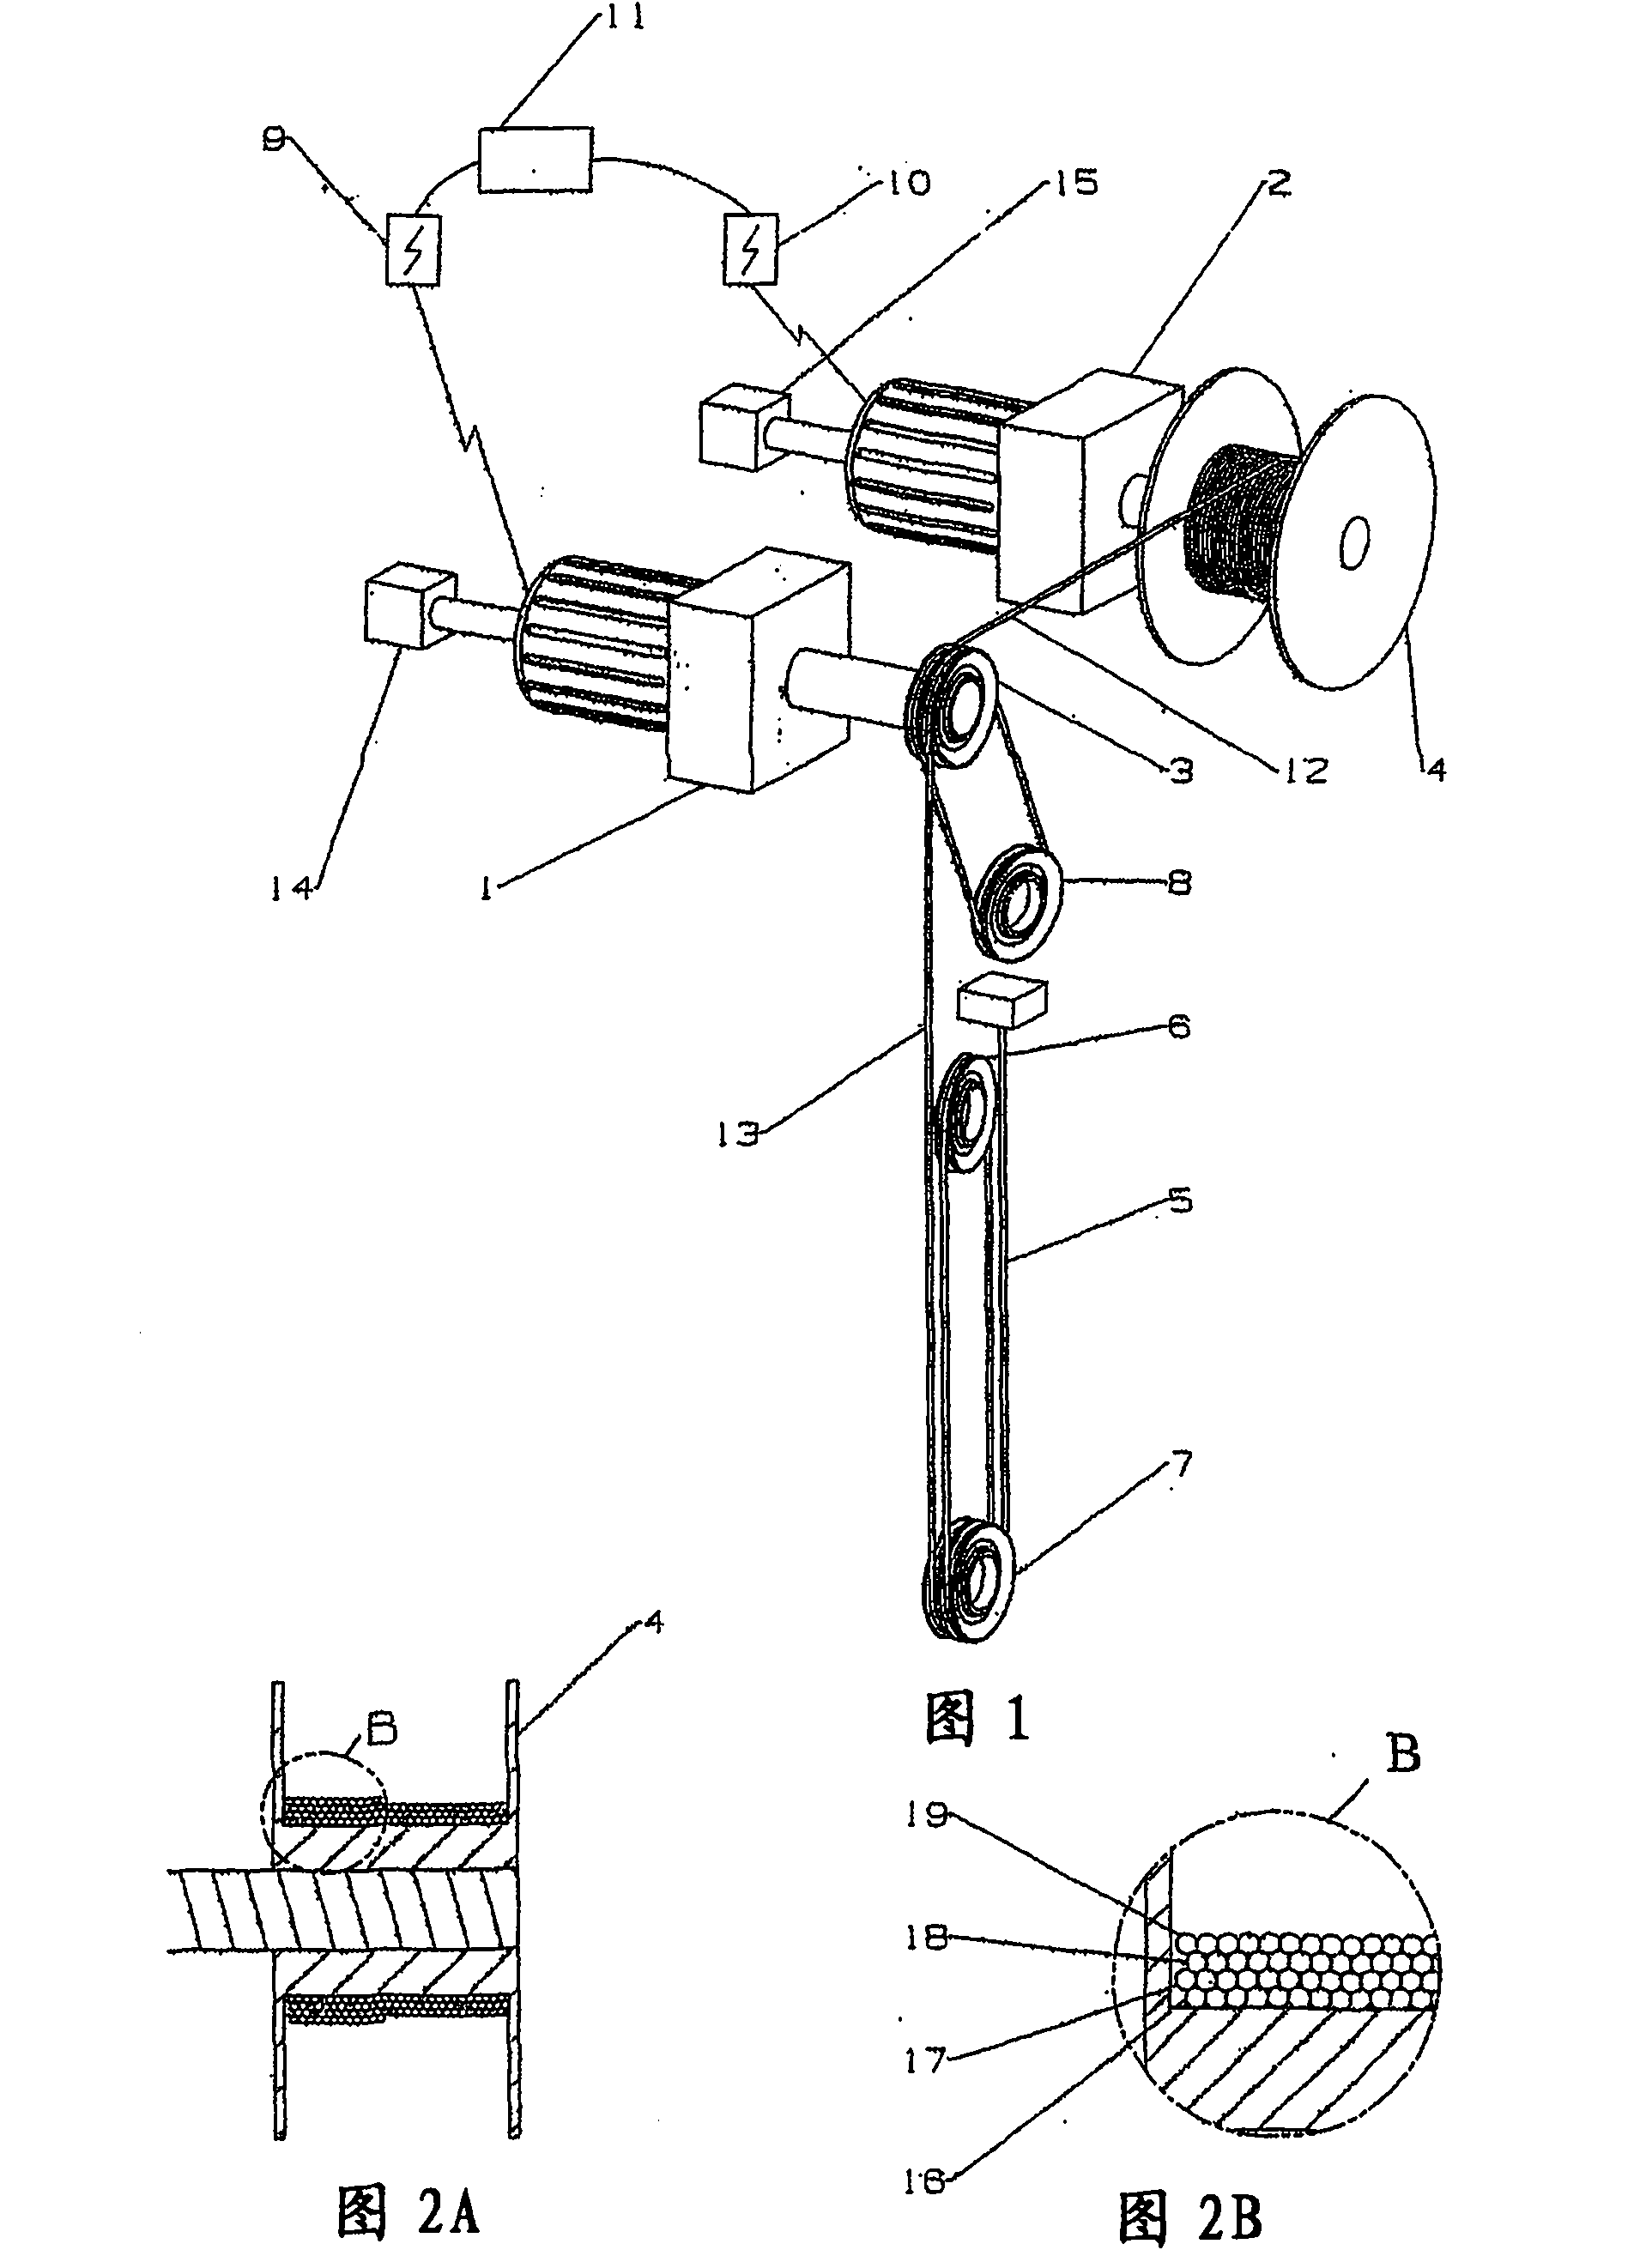 Method for controlling a crane